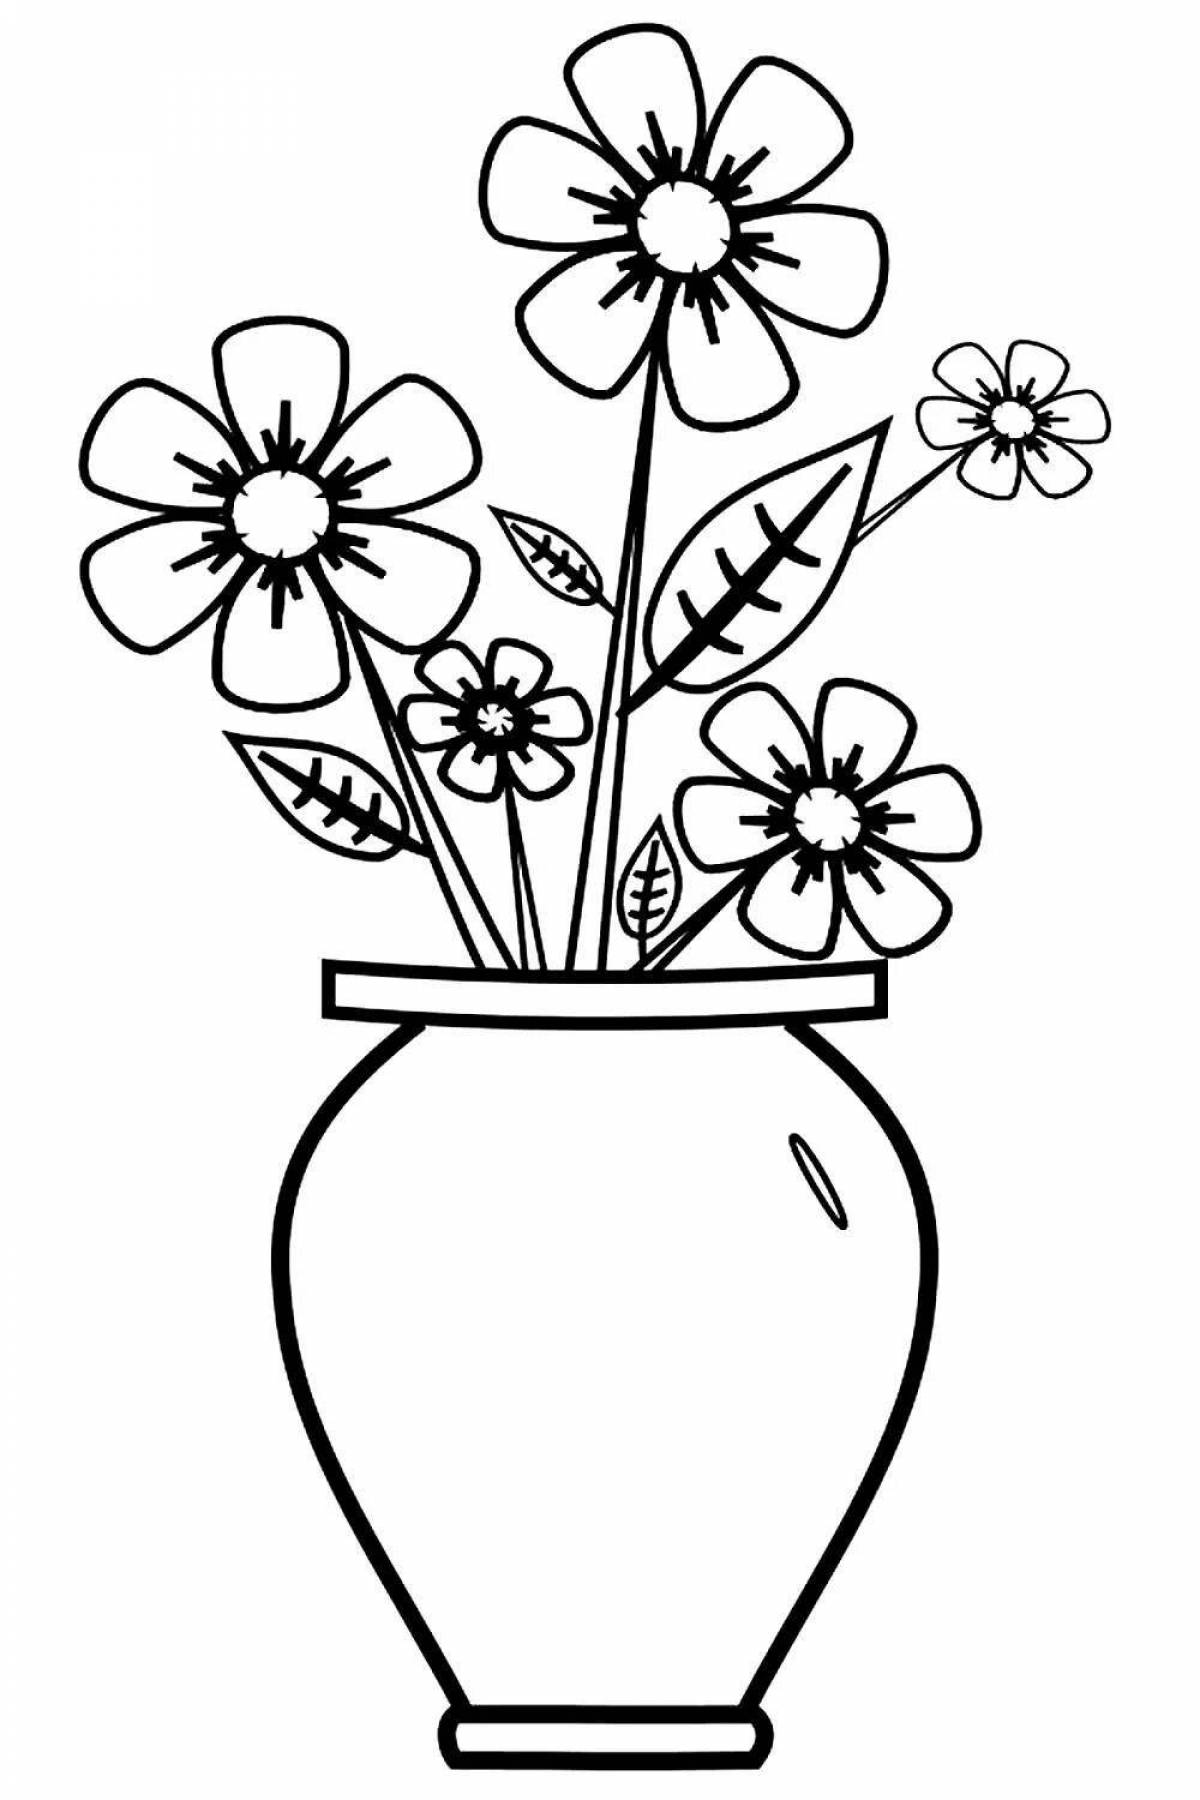 Brilliant vase of flowers coloring book